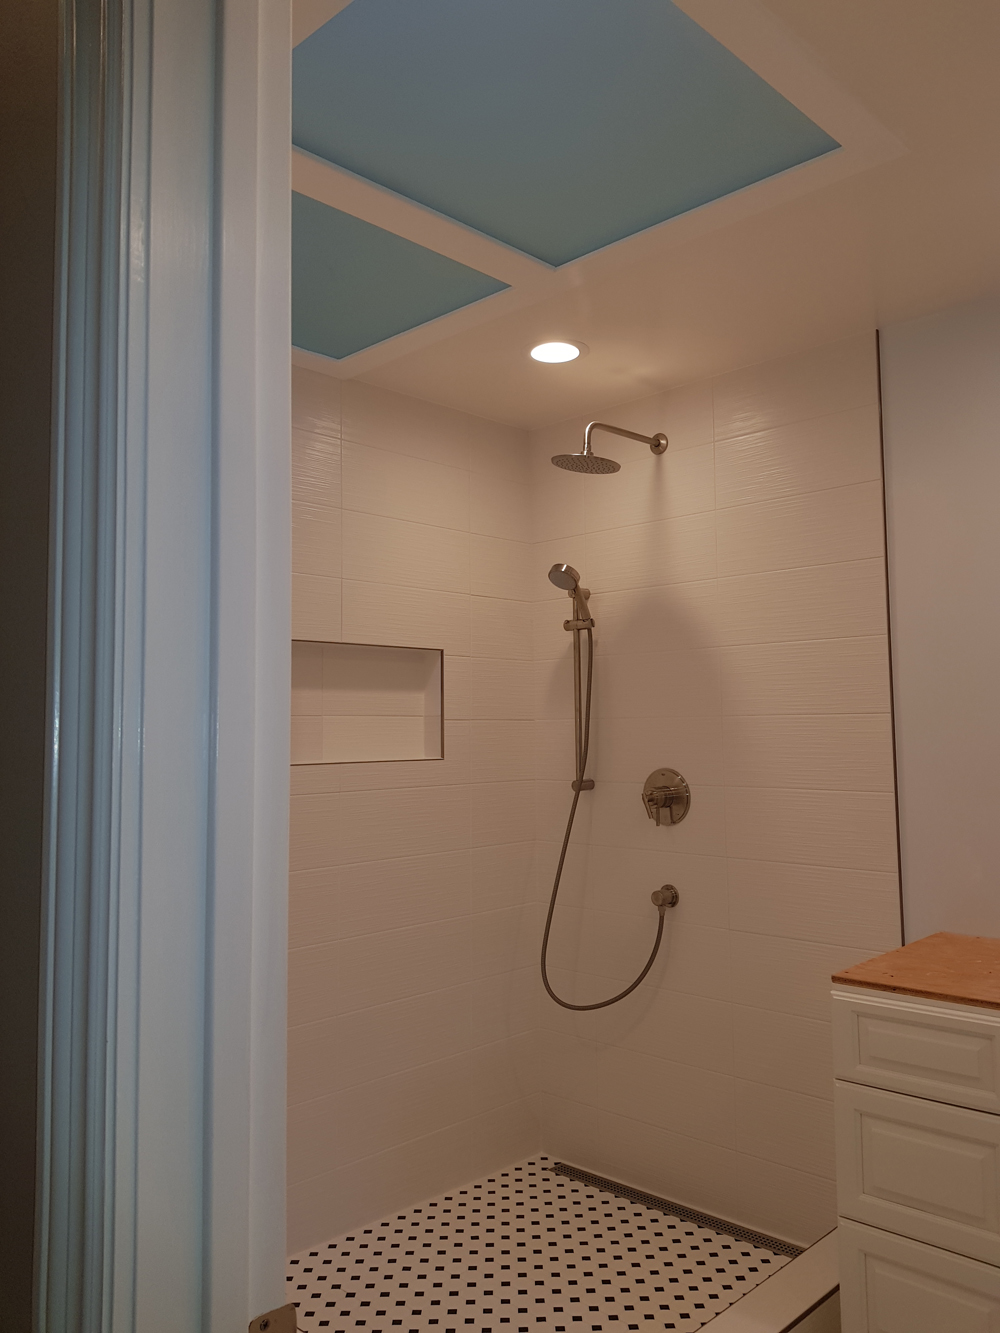 Bathroom with pale pink walls and ceiling and a high shower area